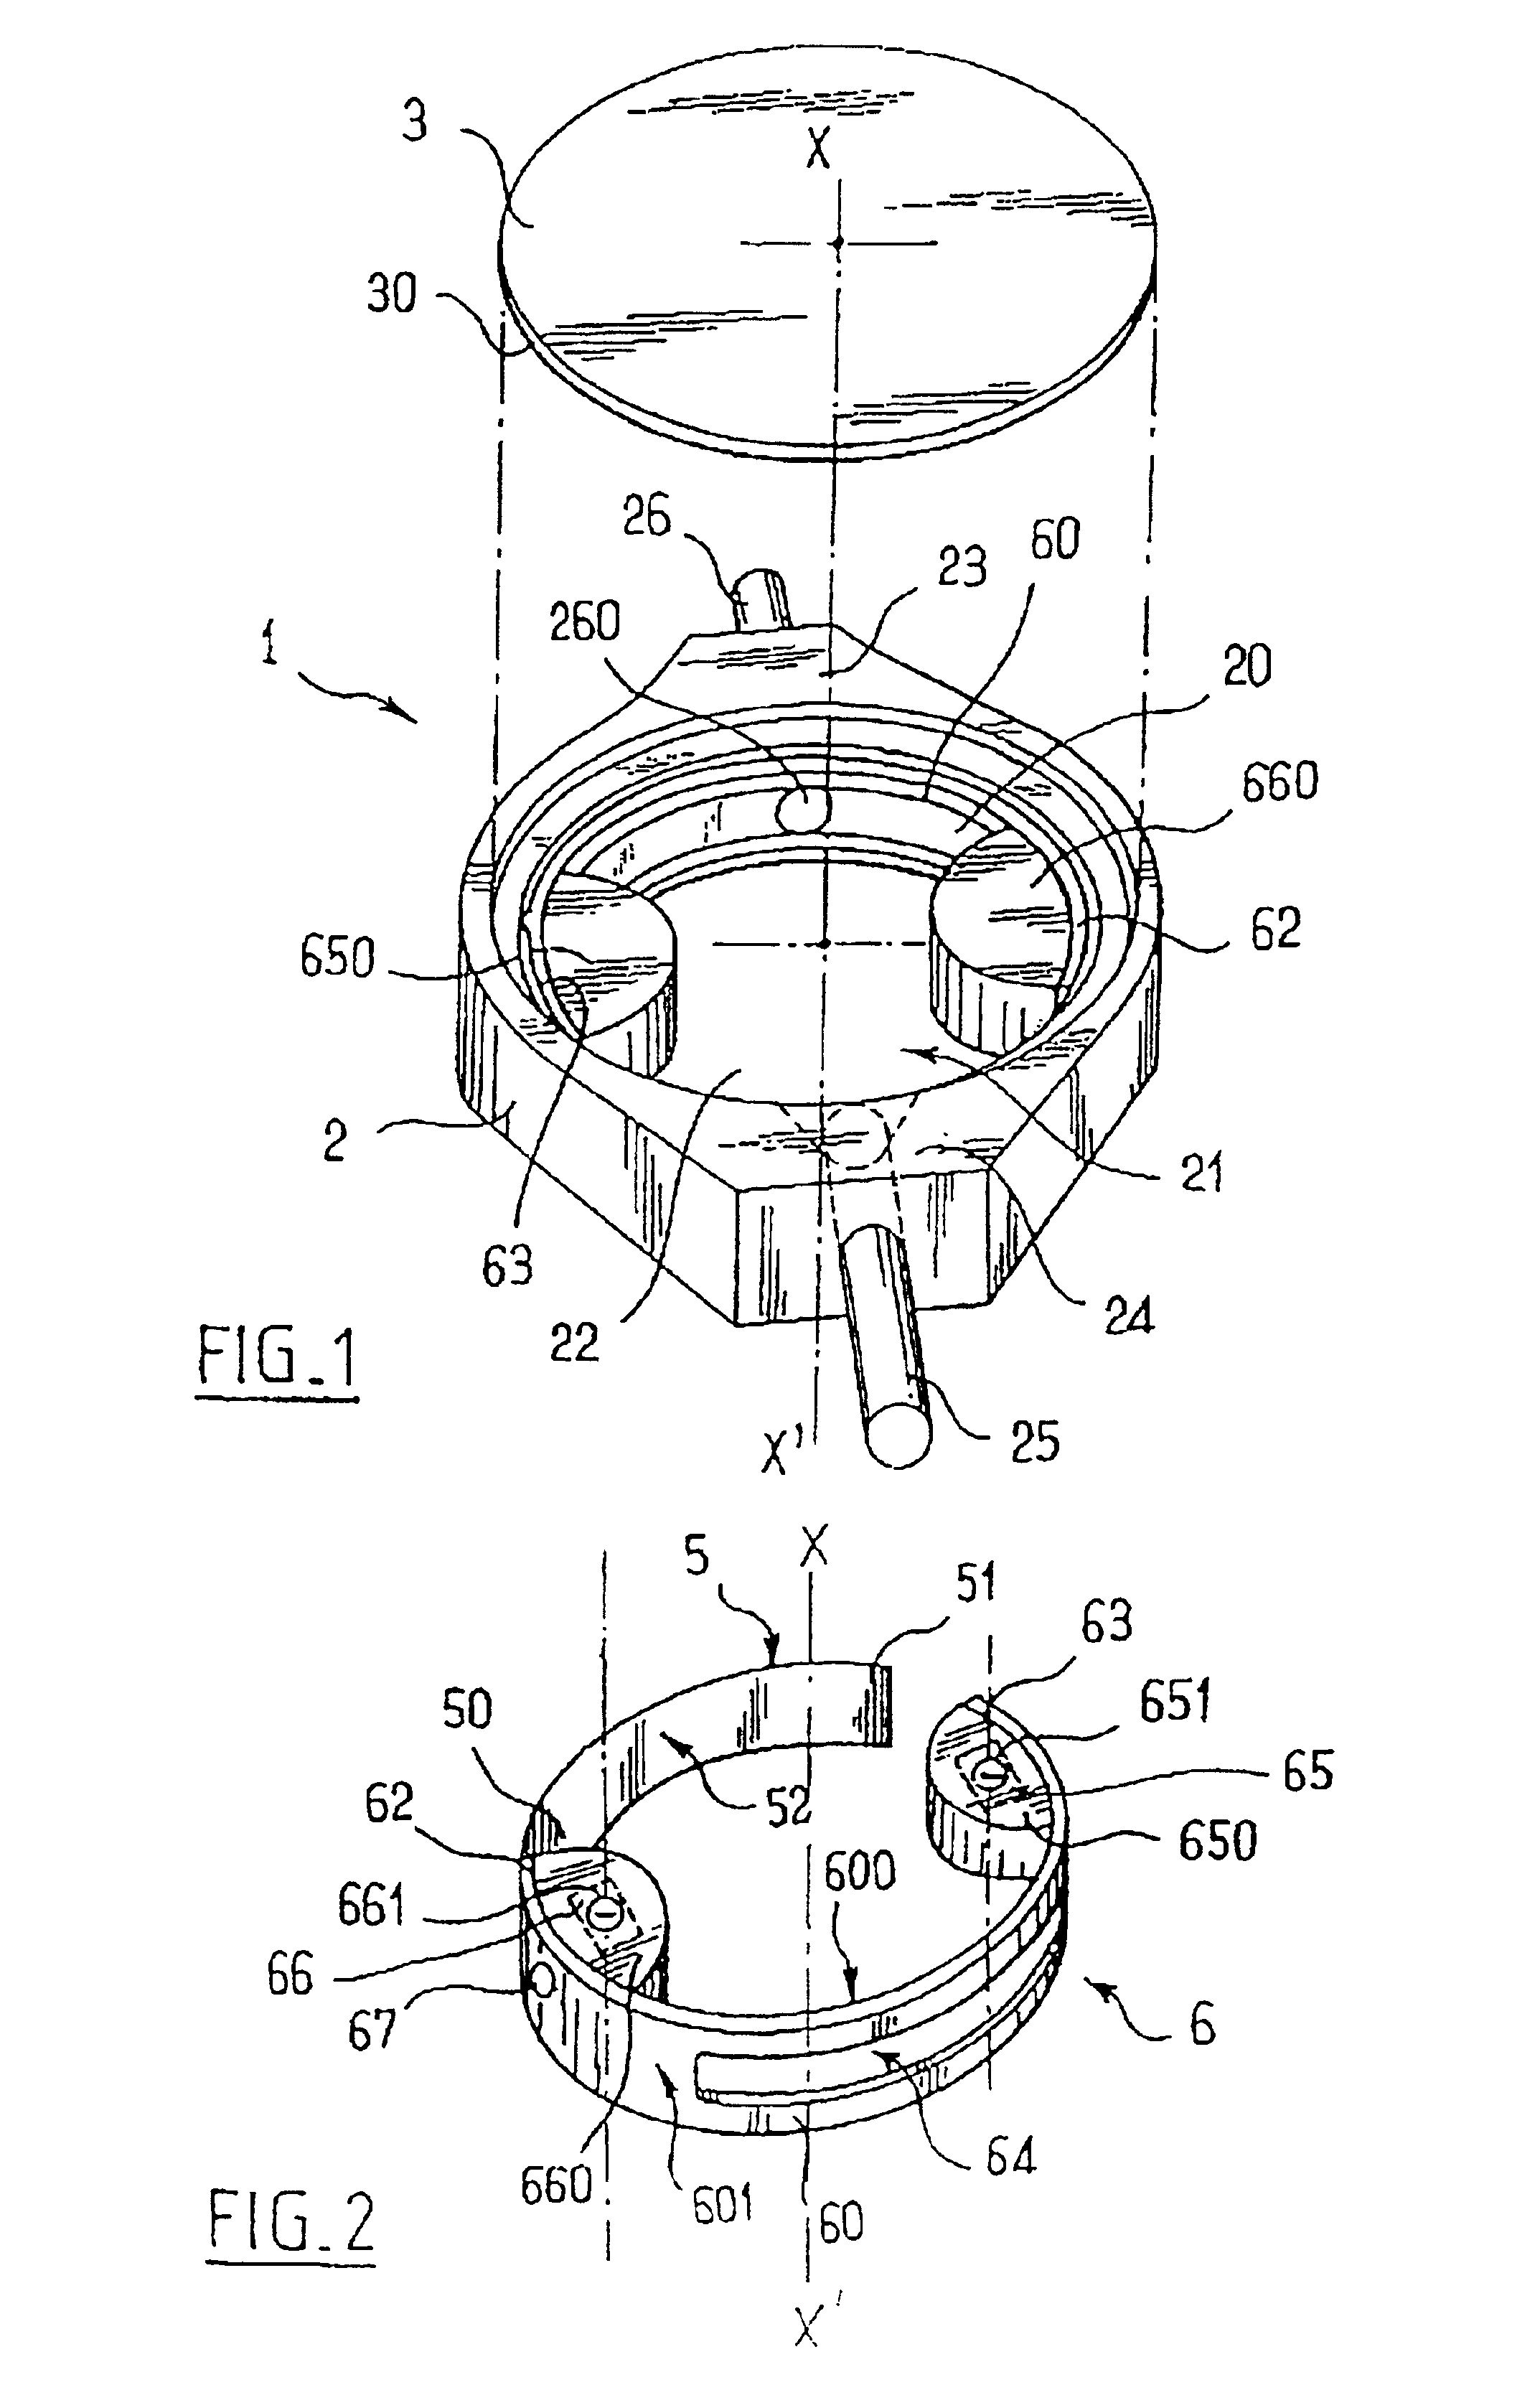 Implantable subcutaneous valve for the treatment of hydrocephalus, and adjusting devices therefor